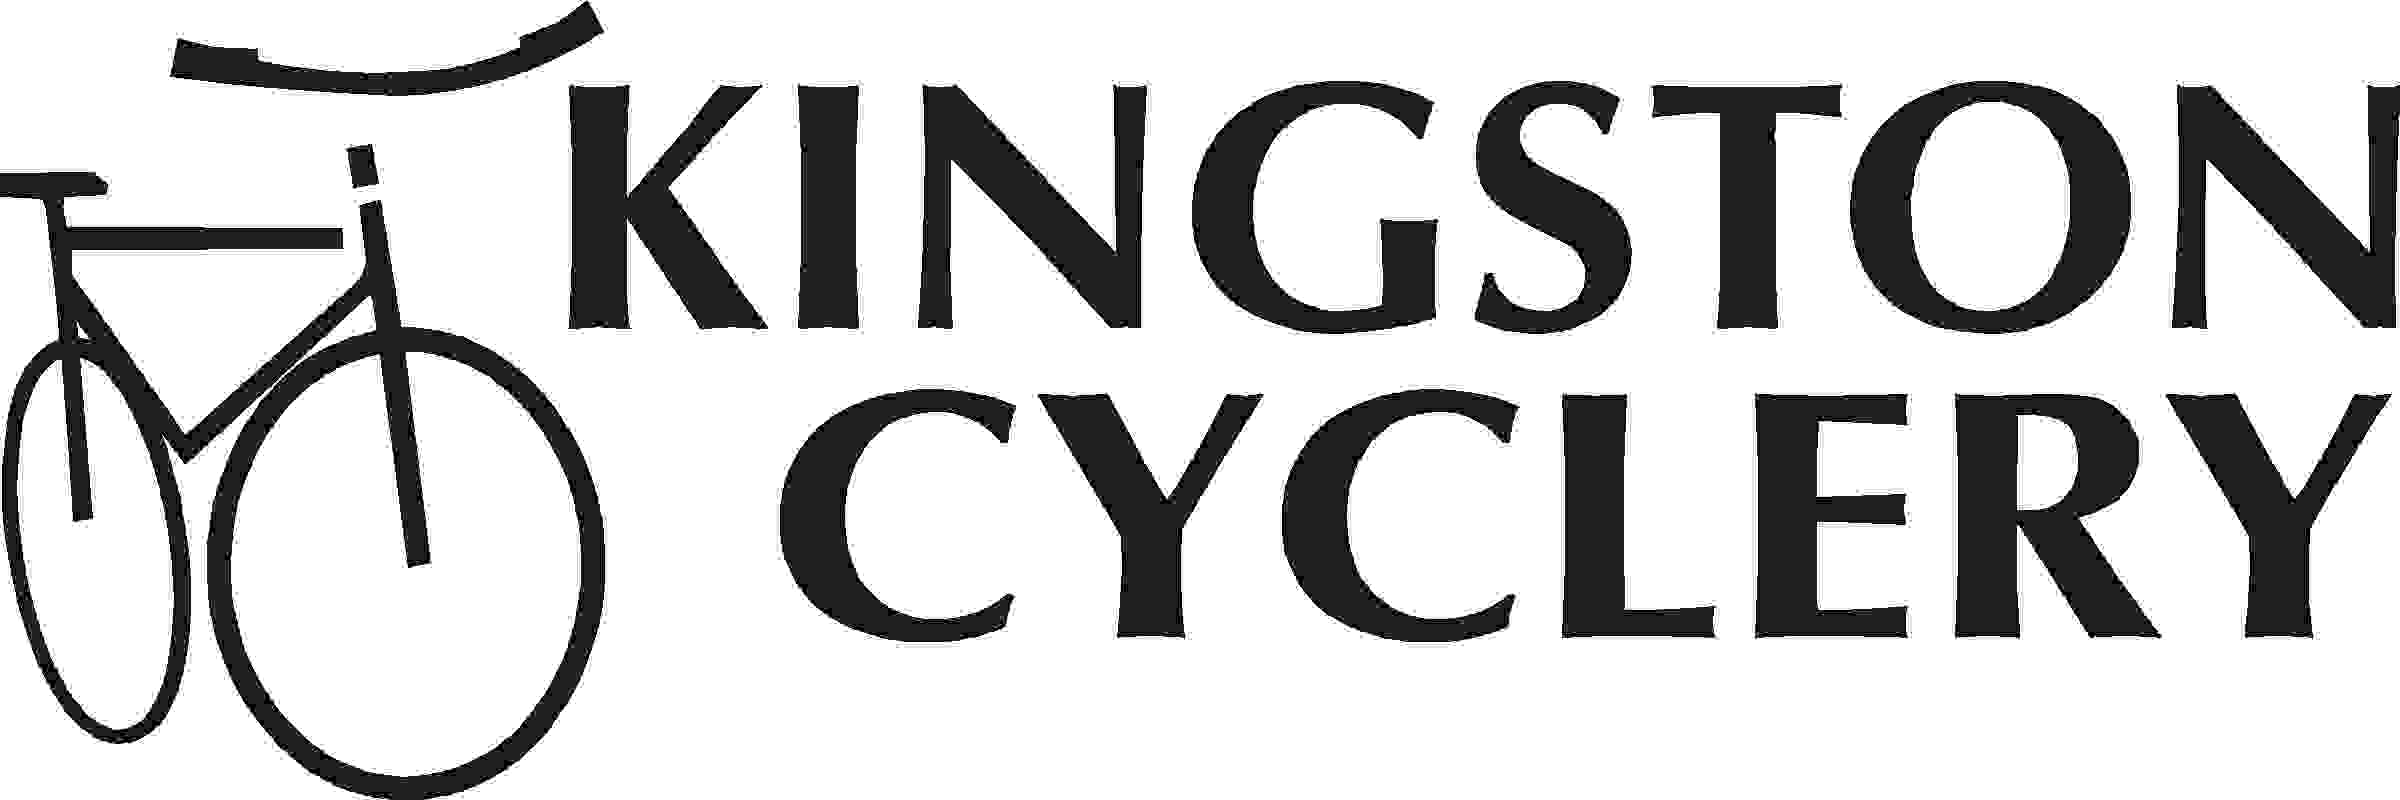 Kingston Cyclery Home Page